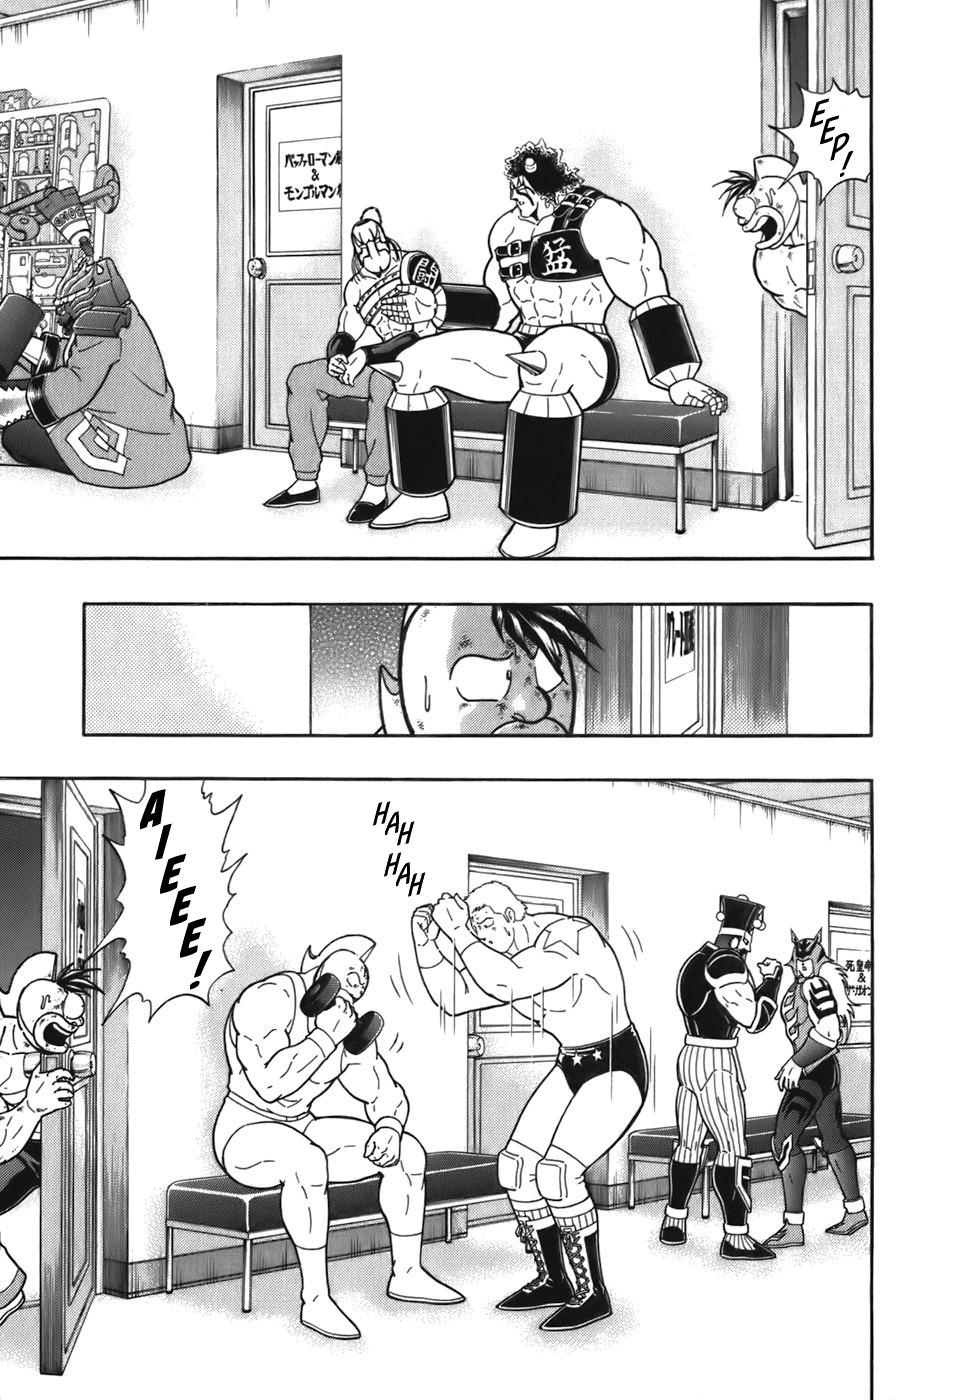 Kinnikuman Nisei: Ultimate Chojin Tag Vol. 5 Ch. 49 Another Search For The "Savior Of The Rest"!?